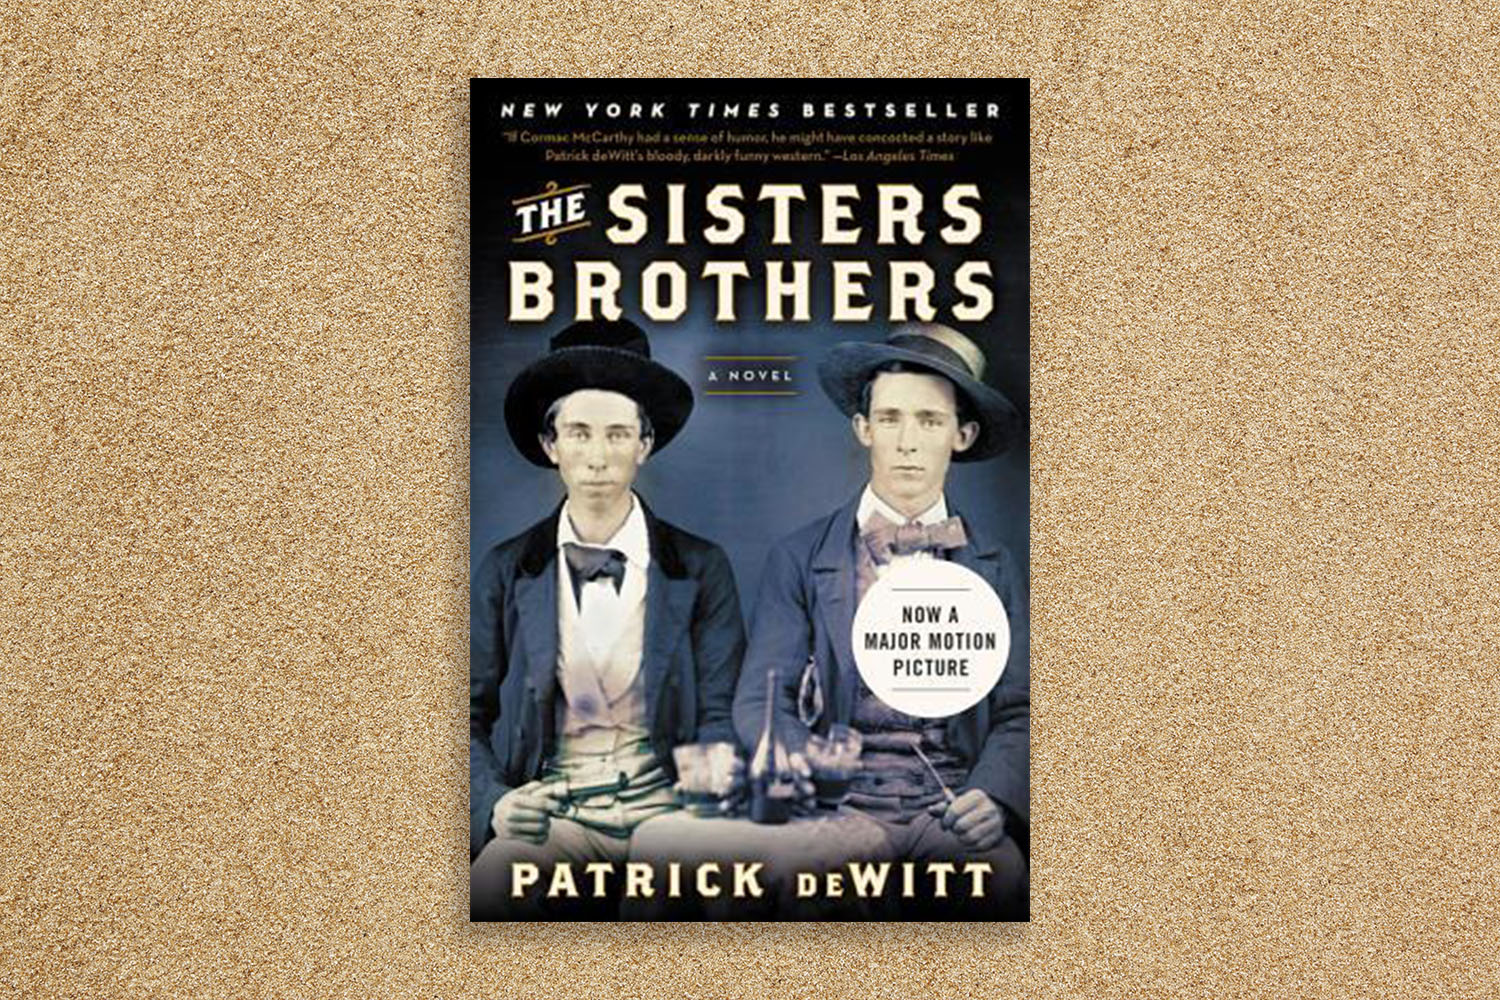 The Sisters Brothers cover.